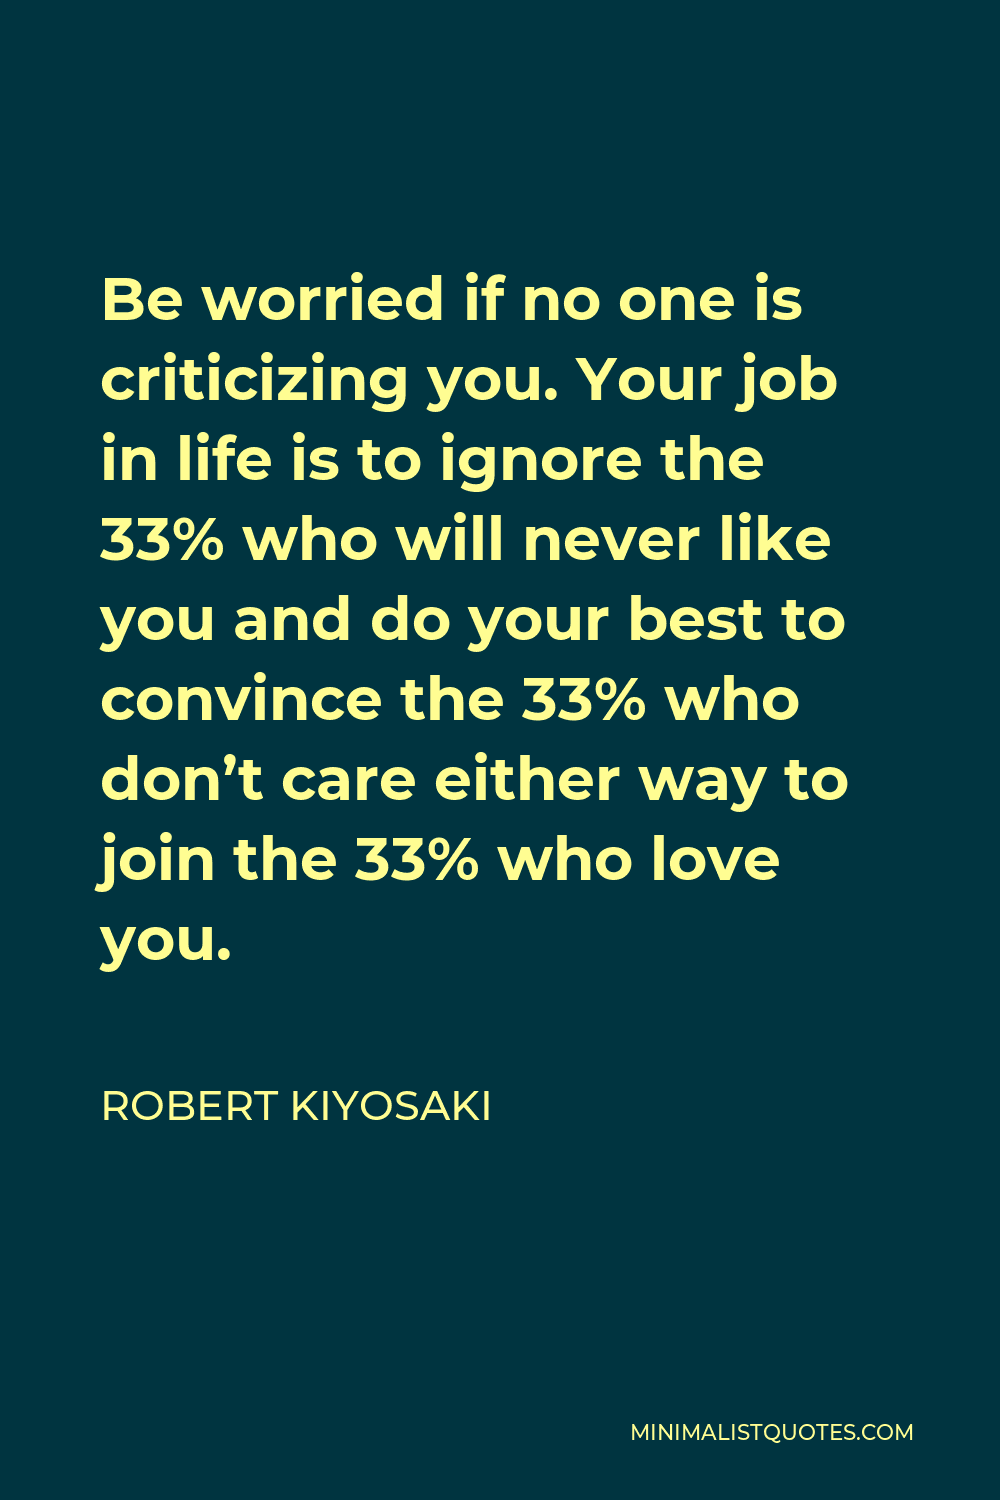 Robert Kiyosaki Quote - Be worried if no one is criticizing you. Your job in life is to ignore the 33% who will never like you and do your best to convince the 33% who don’t care either way to join the 33% who love you.